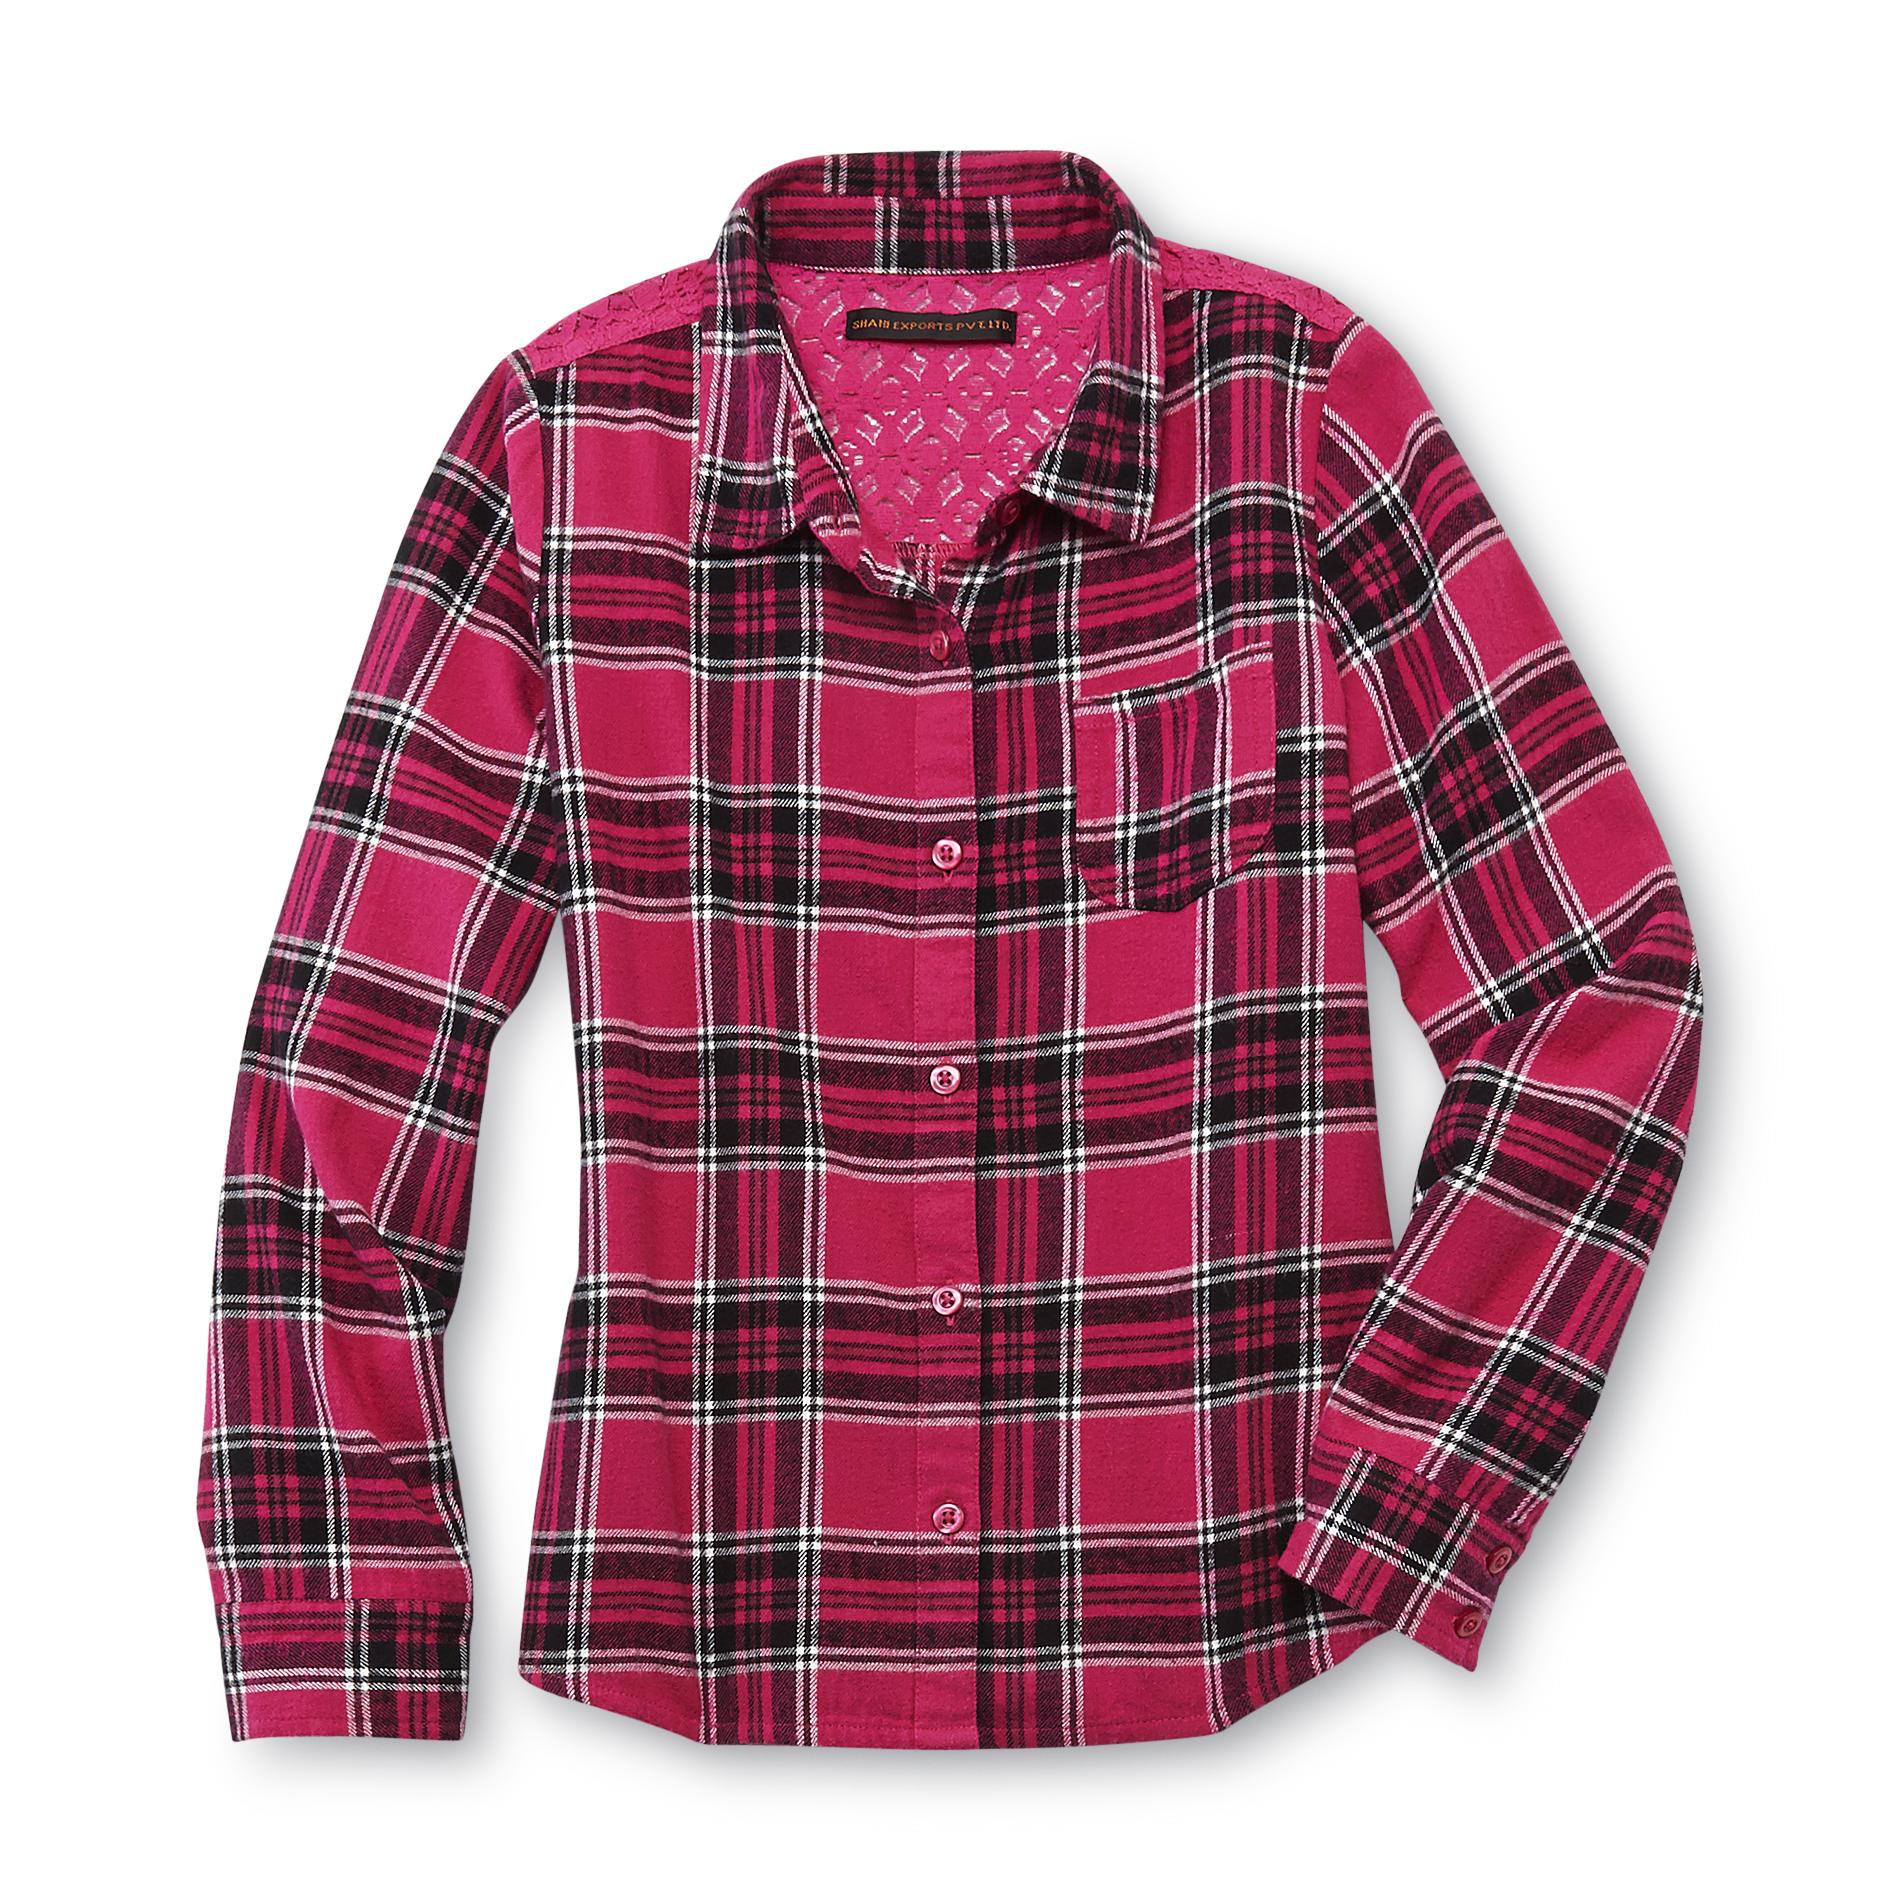 Canyon River Blues Girl's Button-Front Flannel Shirt - Plaid